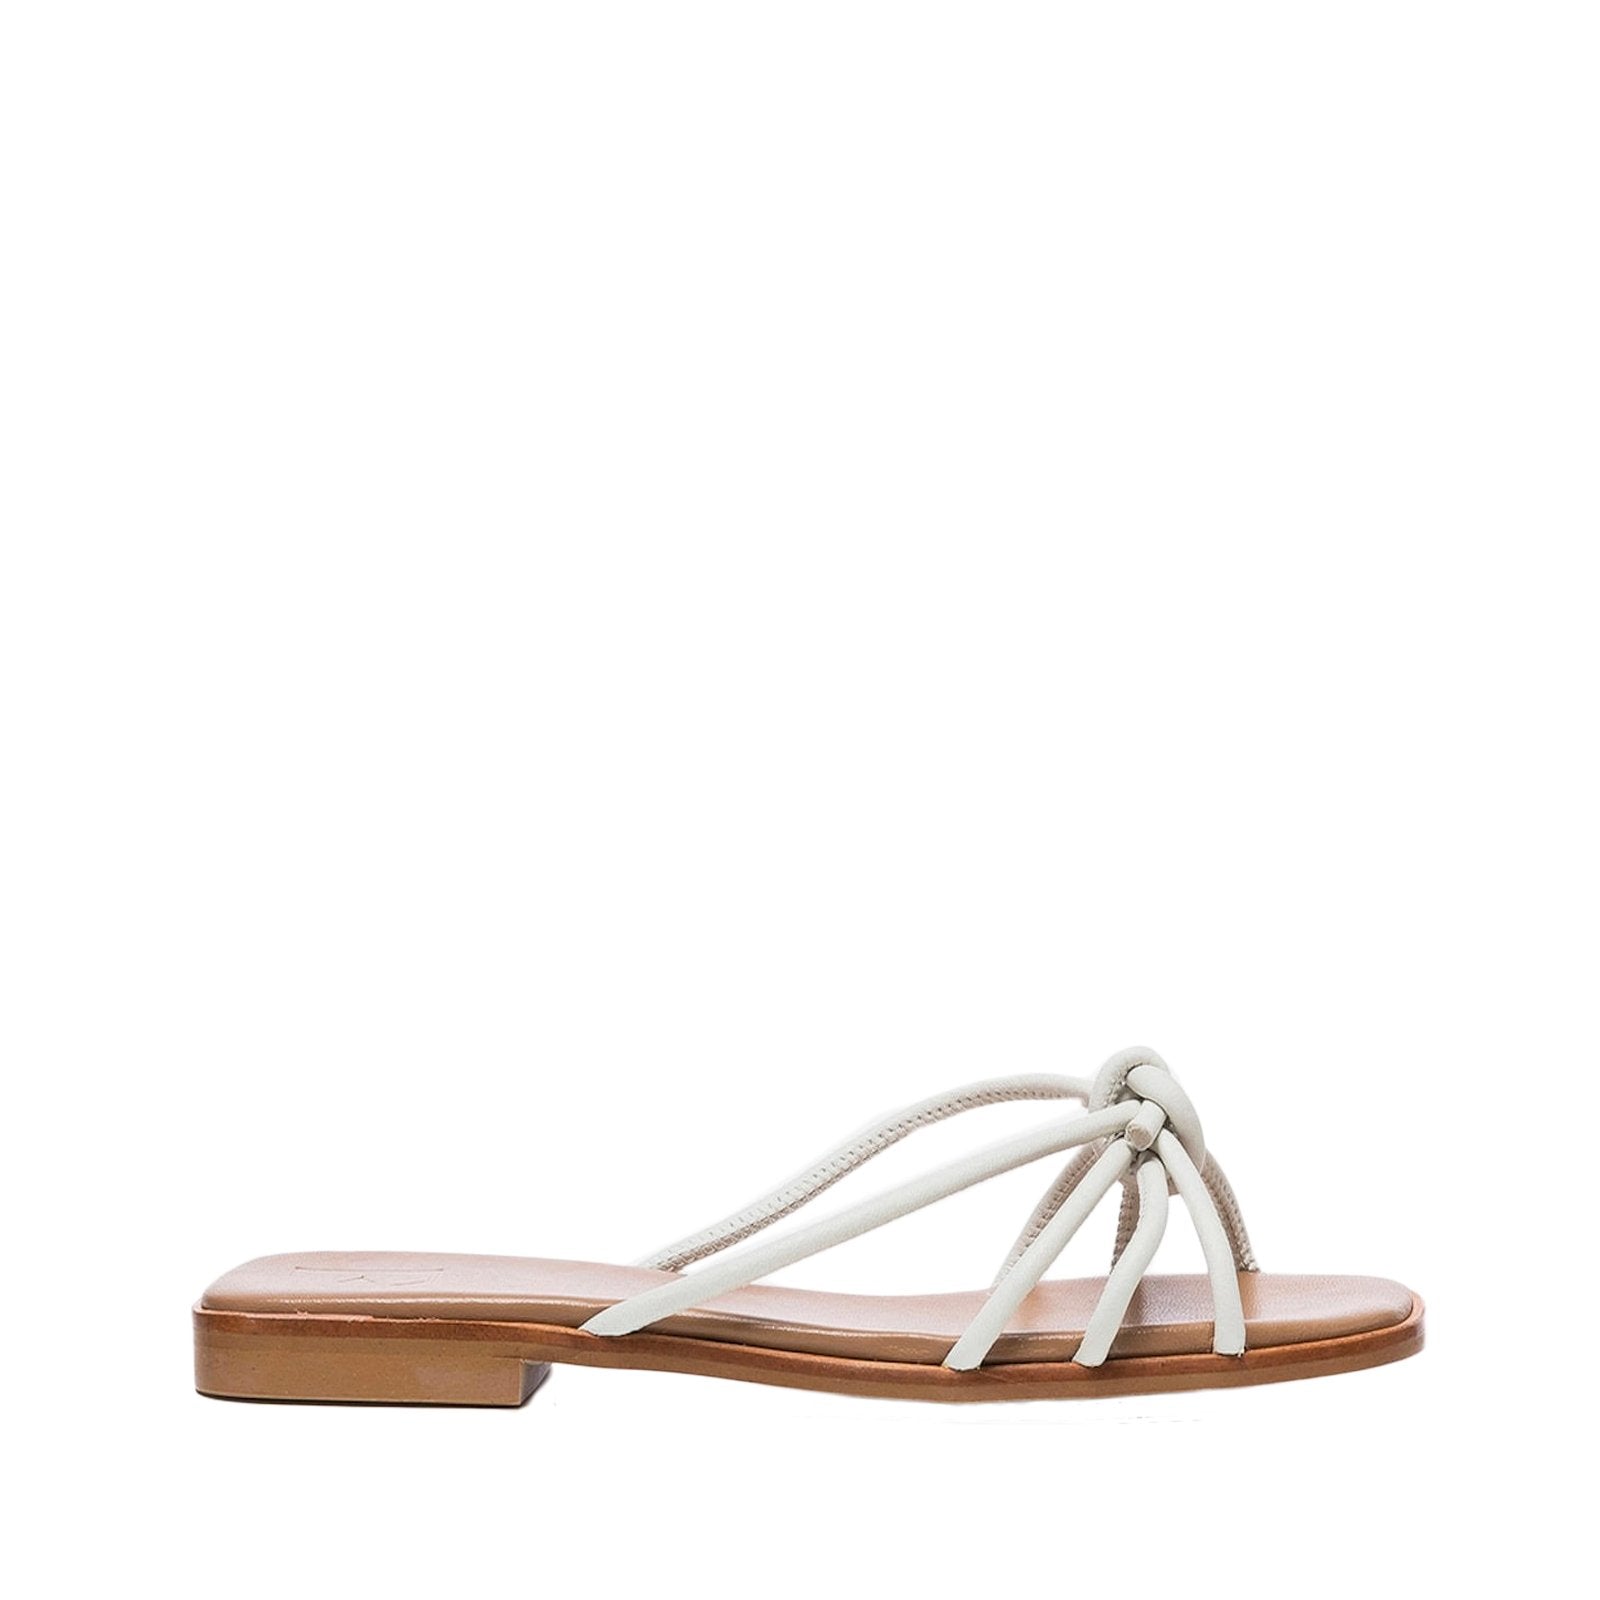 Yvette Leather Off White Flat Sandals Flats 19010700801-008 - 1